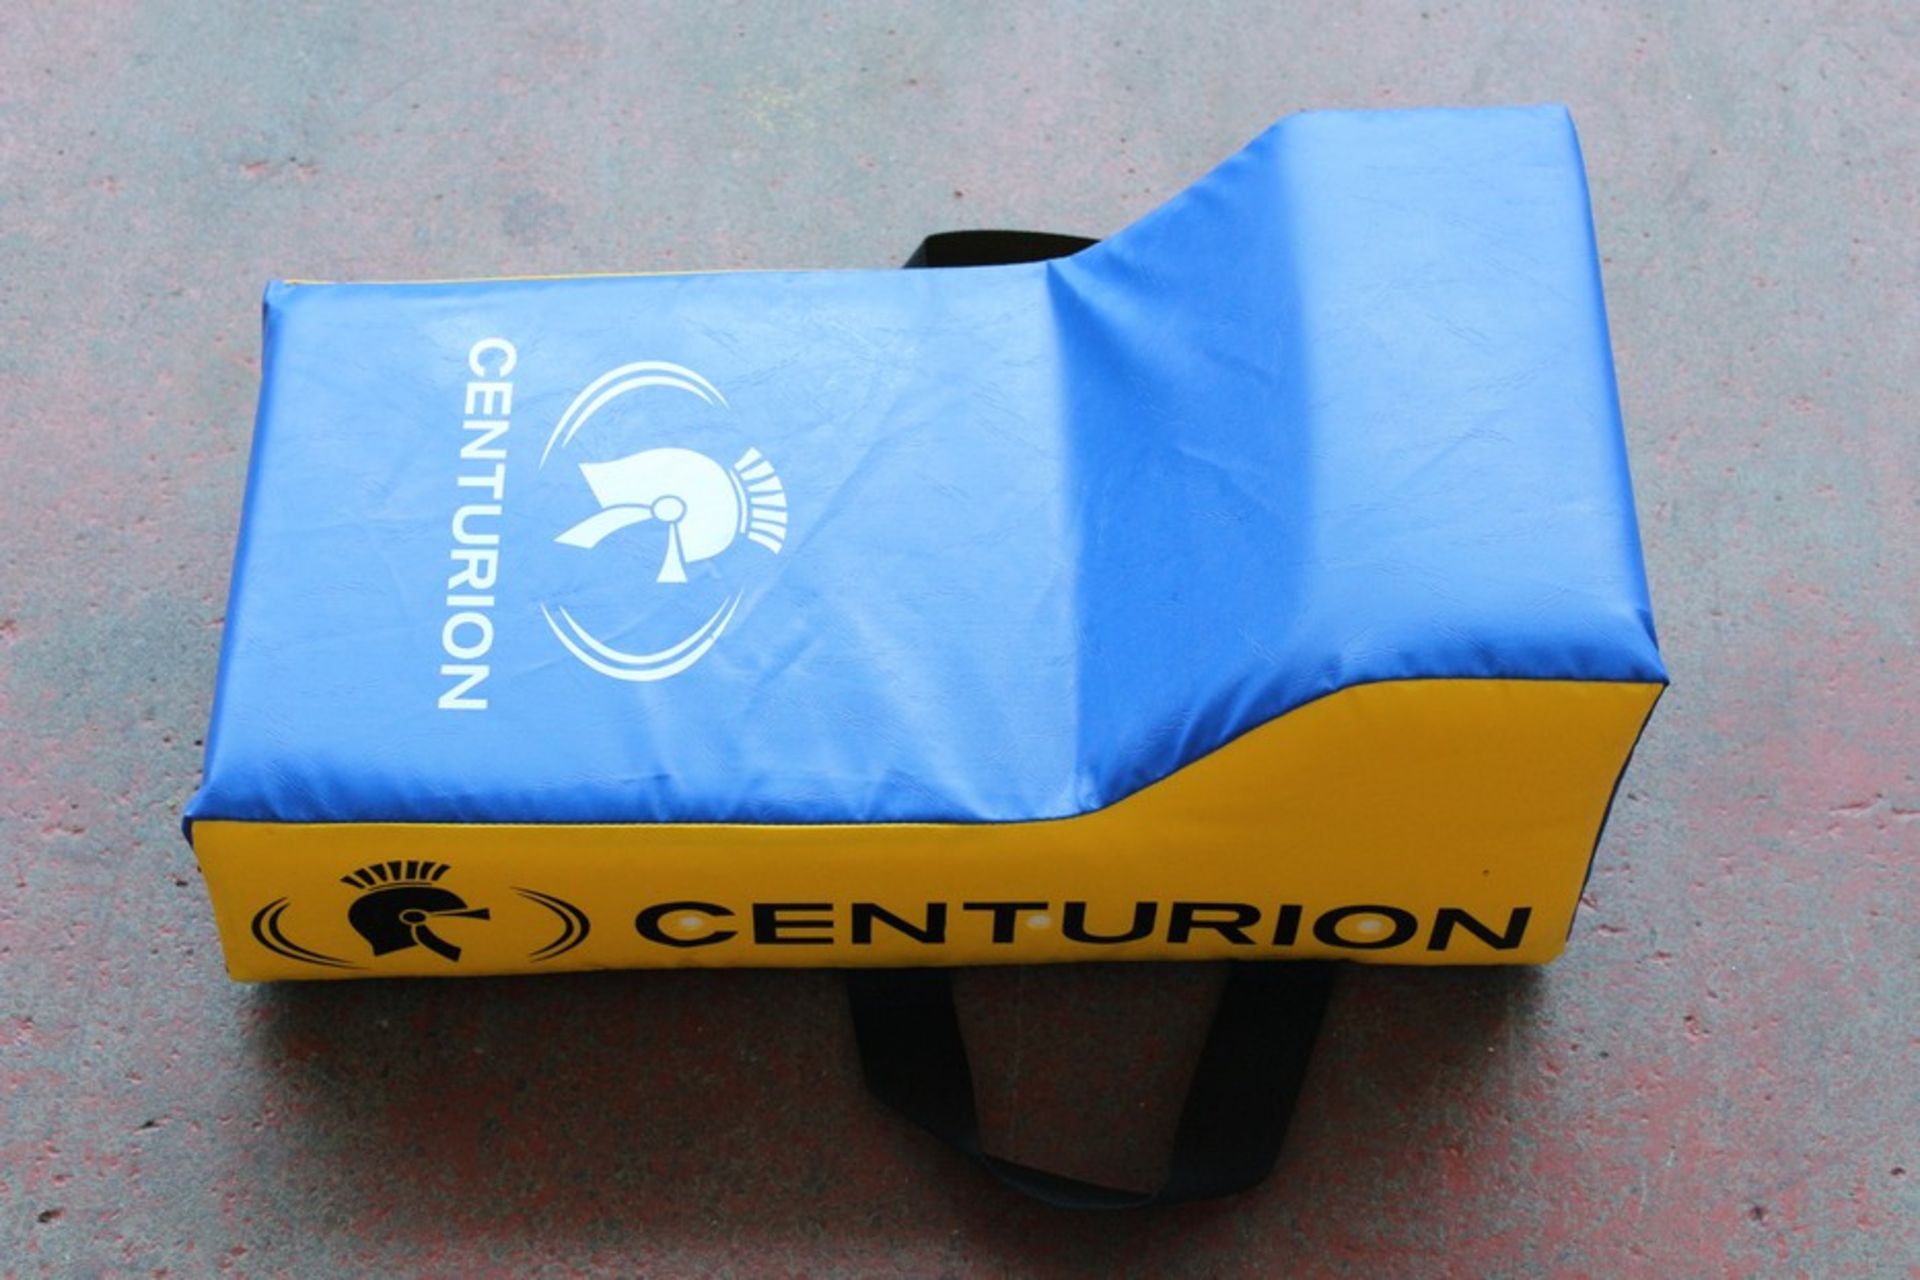 1 x BRAND NEW SENTUTIAN TRAINING PAD   *PLEASE NOTE THAT THE BID PRICE IS MULTIPLIED BY THE NUMBER